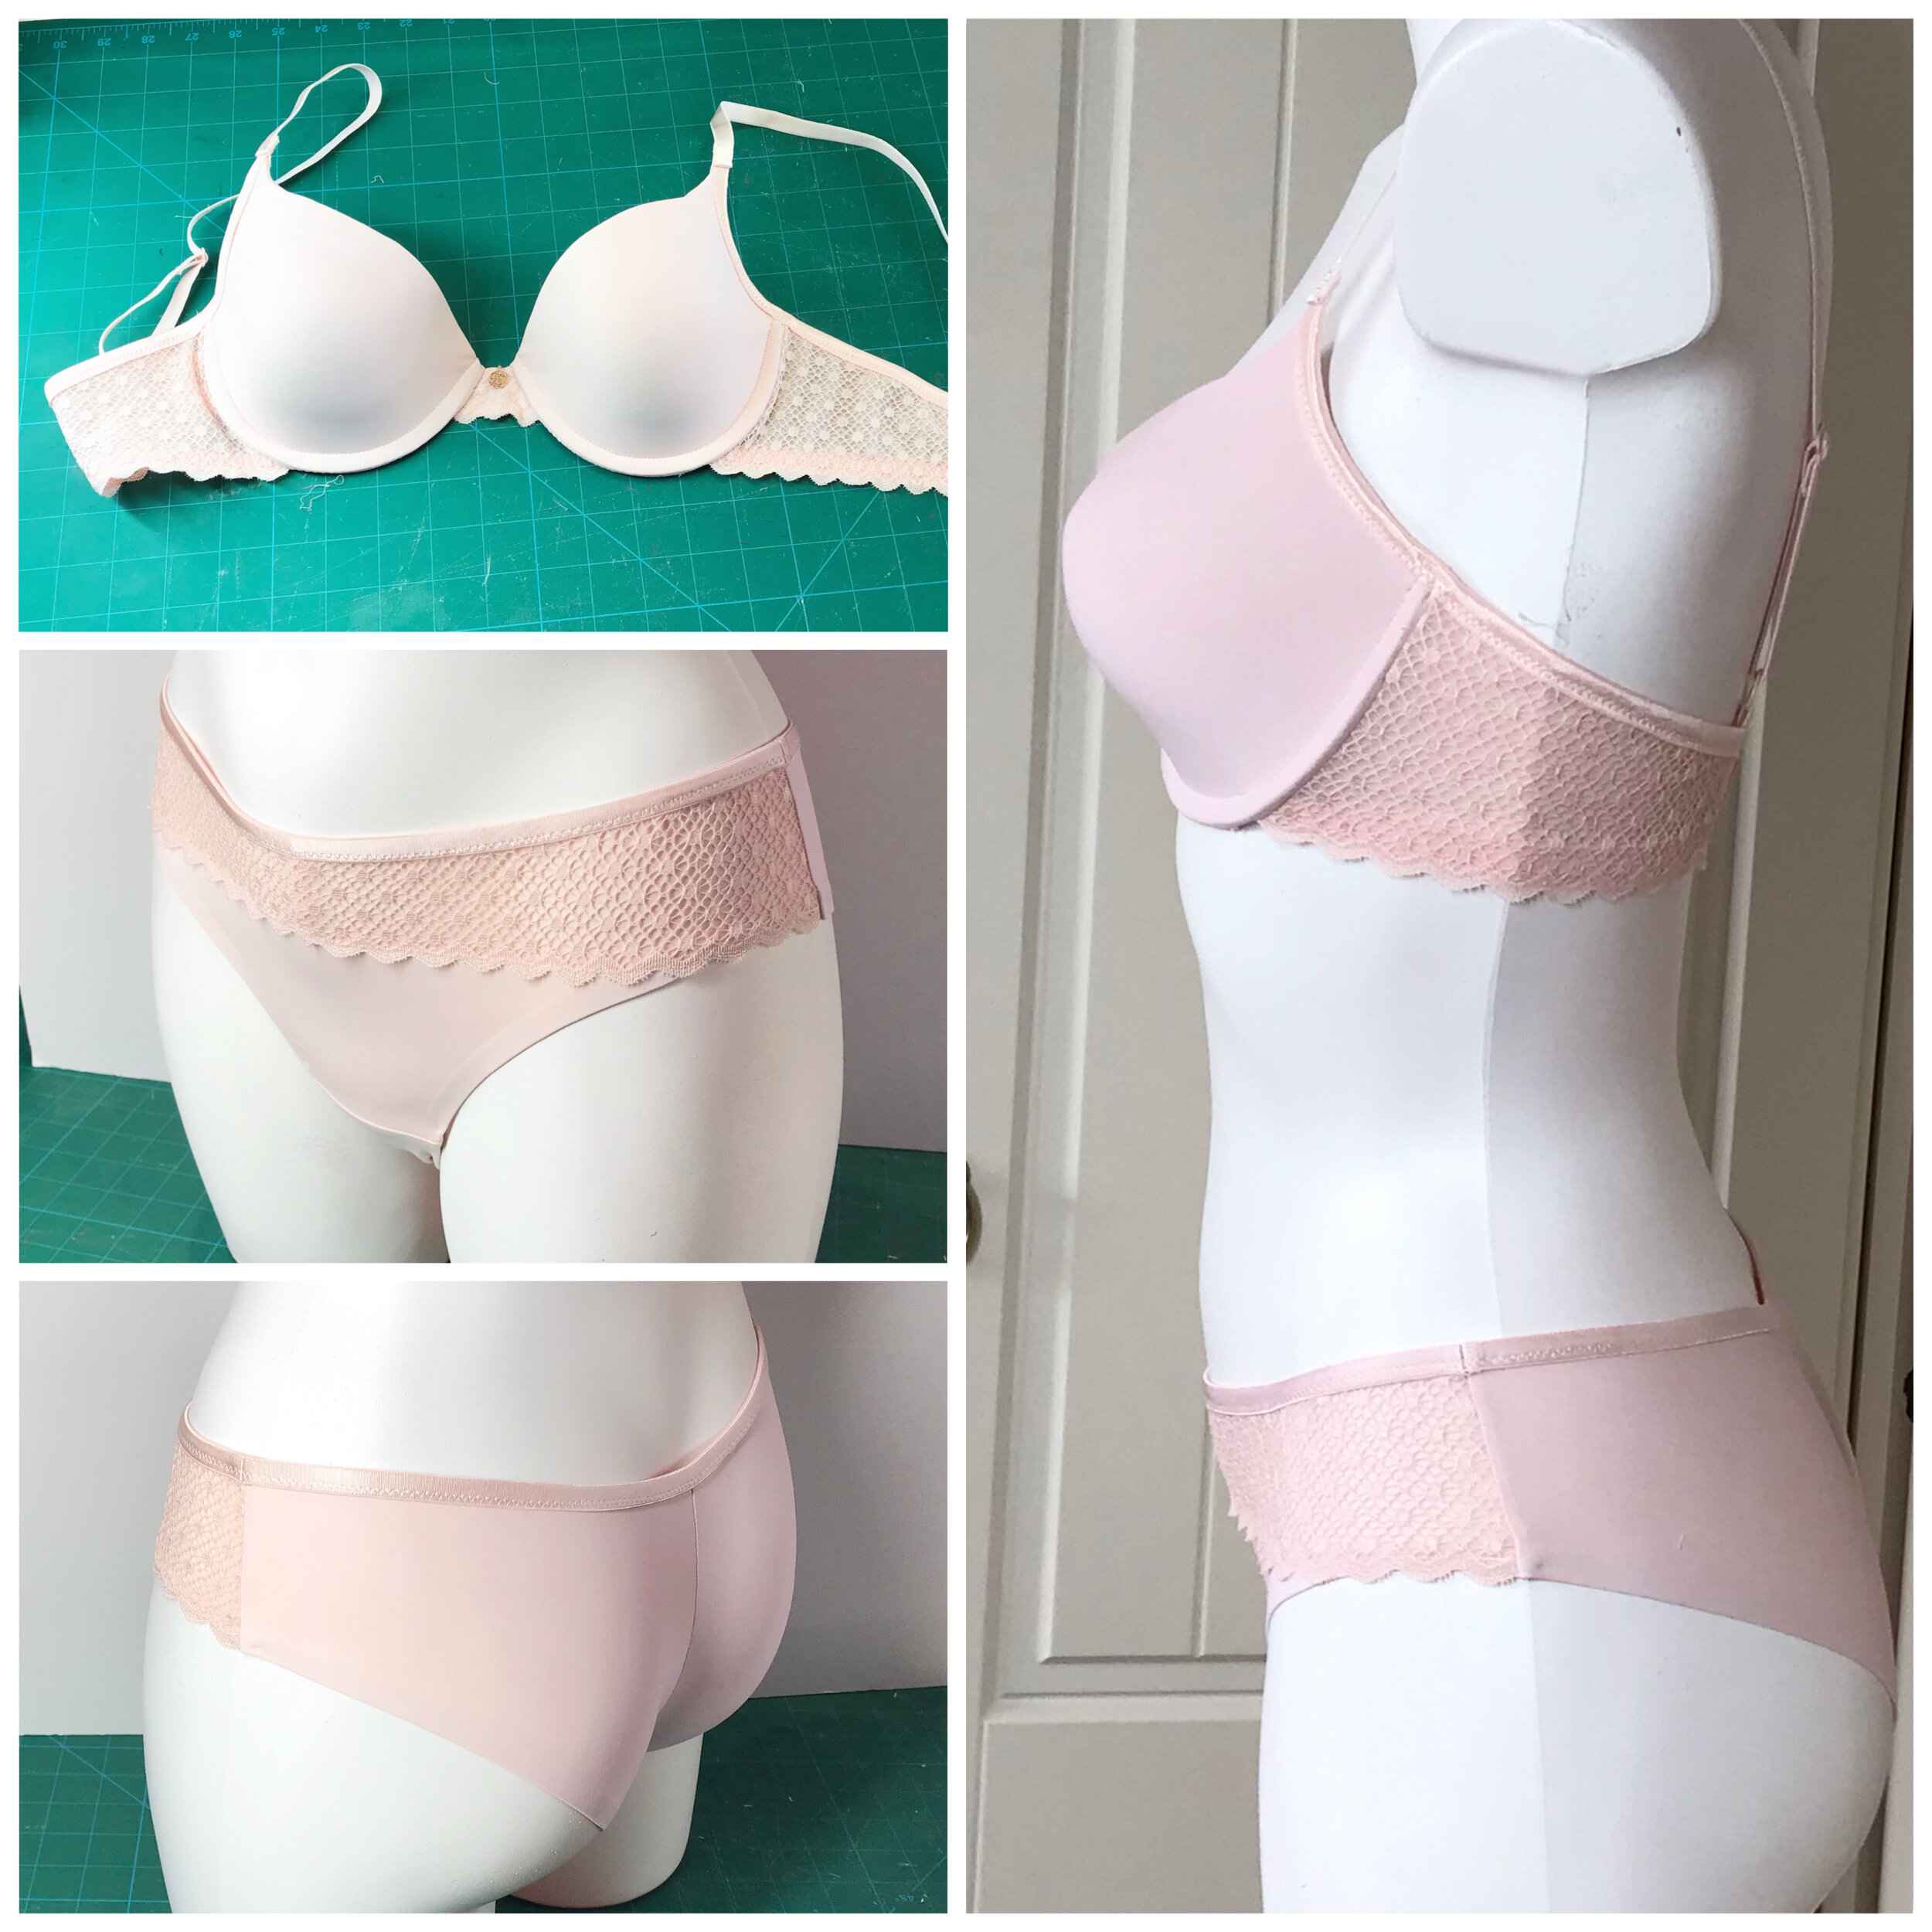 Simplicity Misses' Plunge Bra and Panties 8436 pattern review by